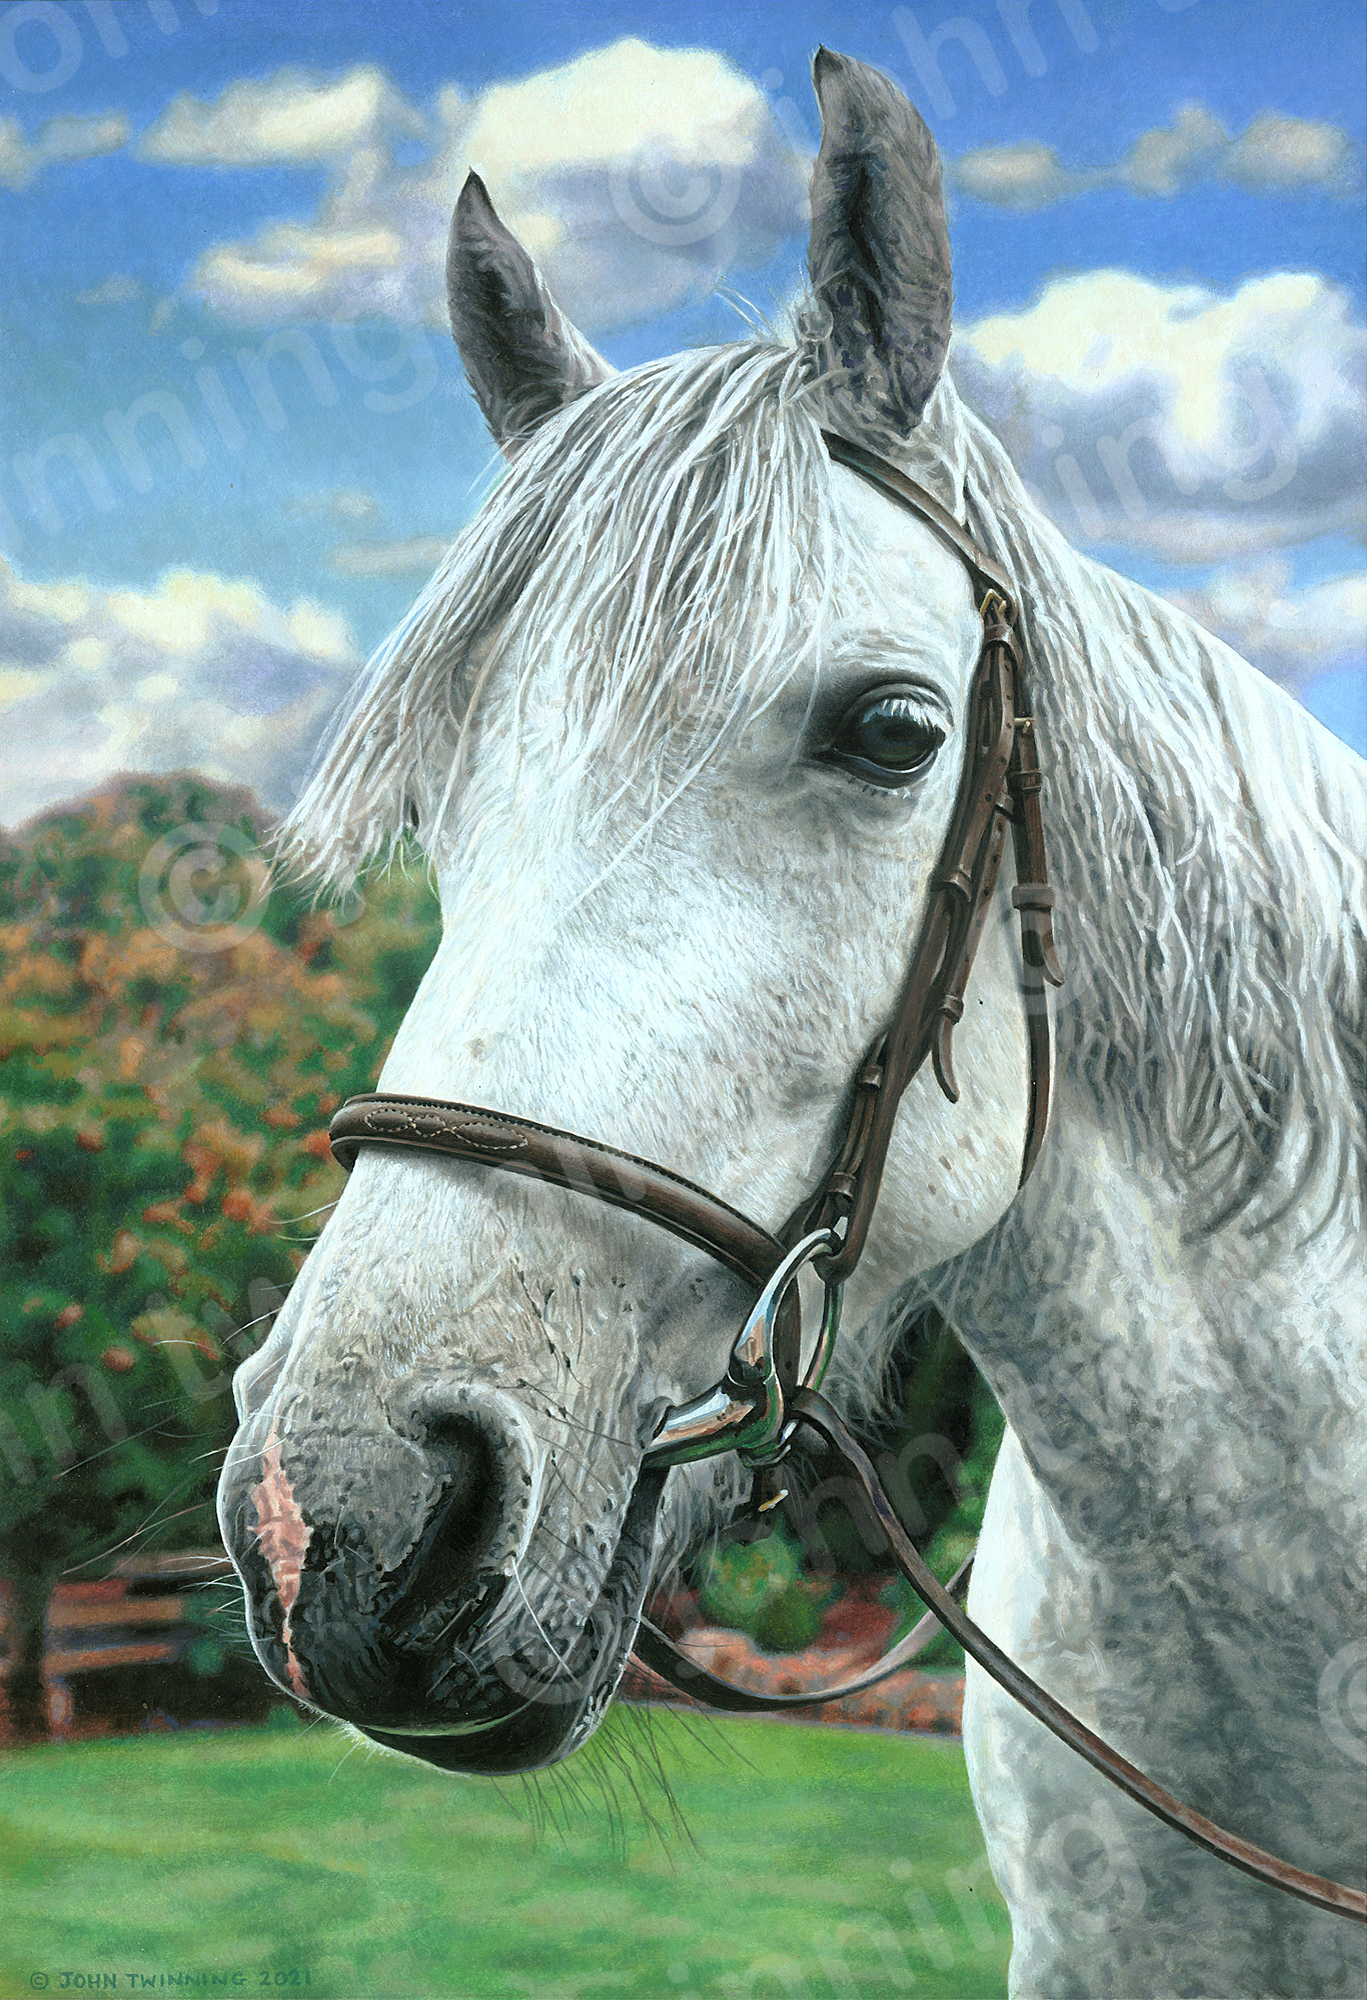 'Valda' - art print from an equestrian pet portrait watercolour painting of a grey mare